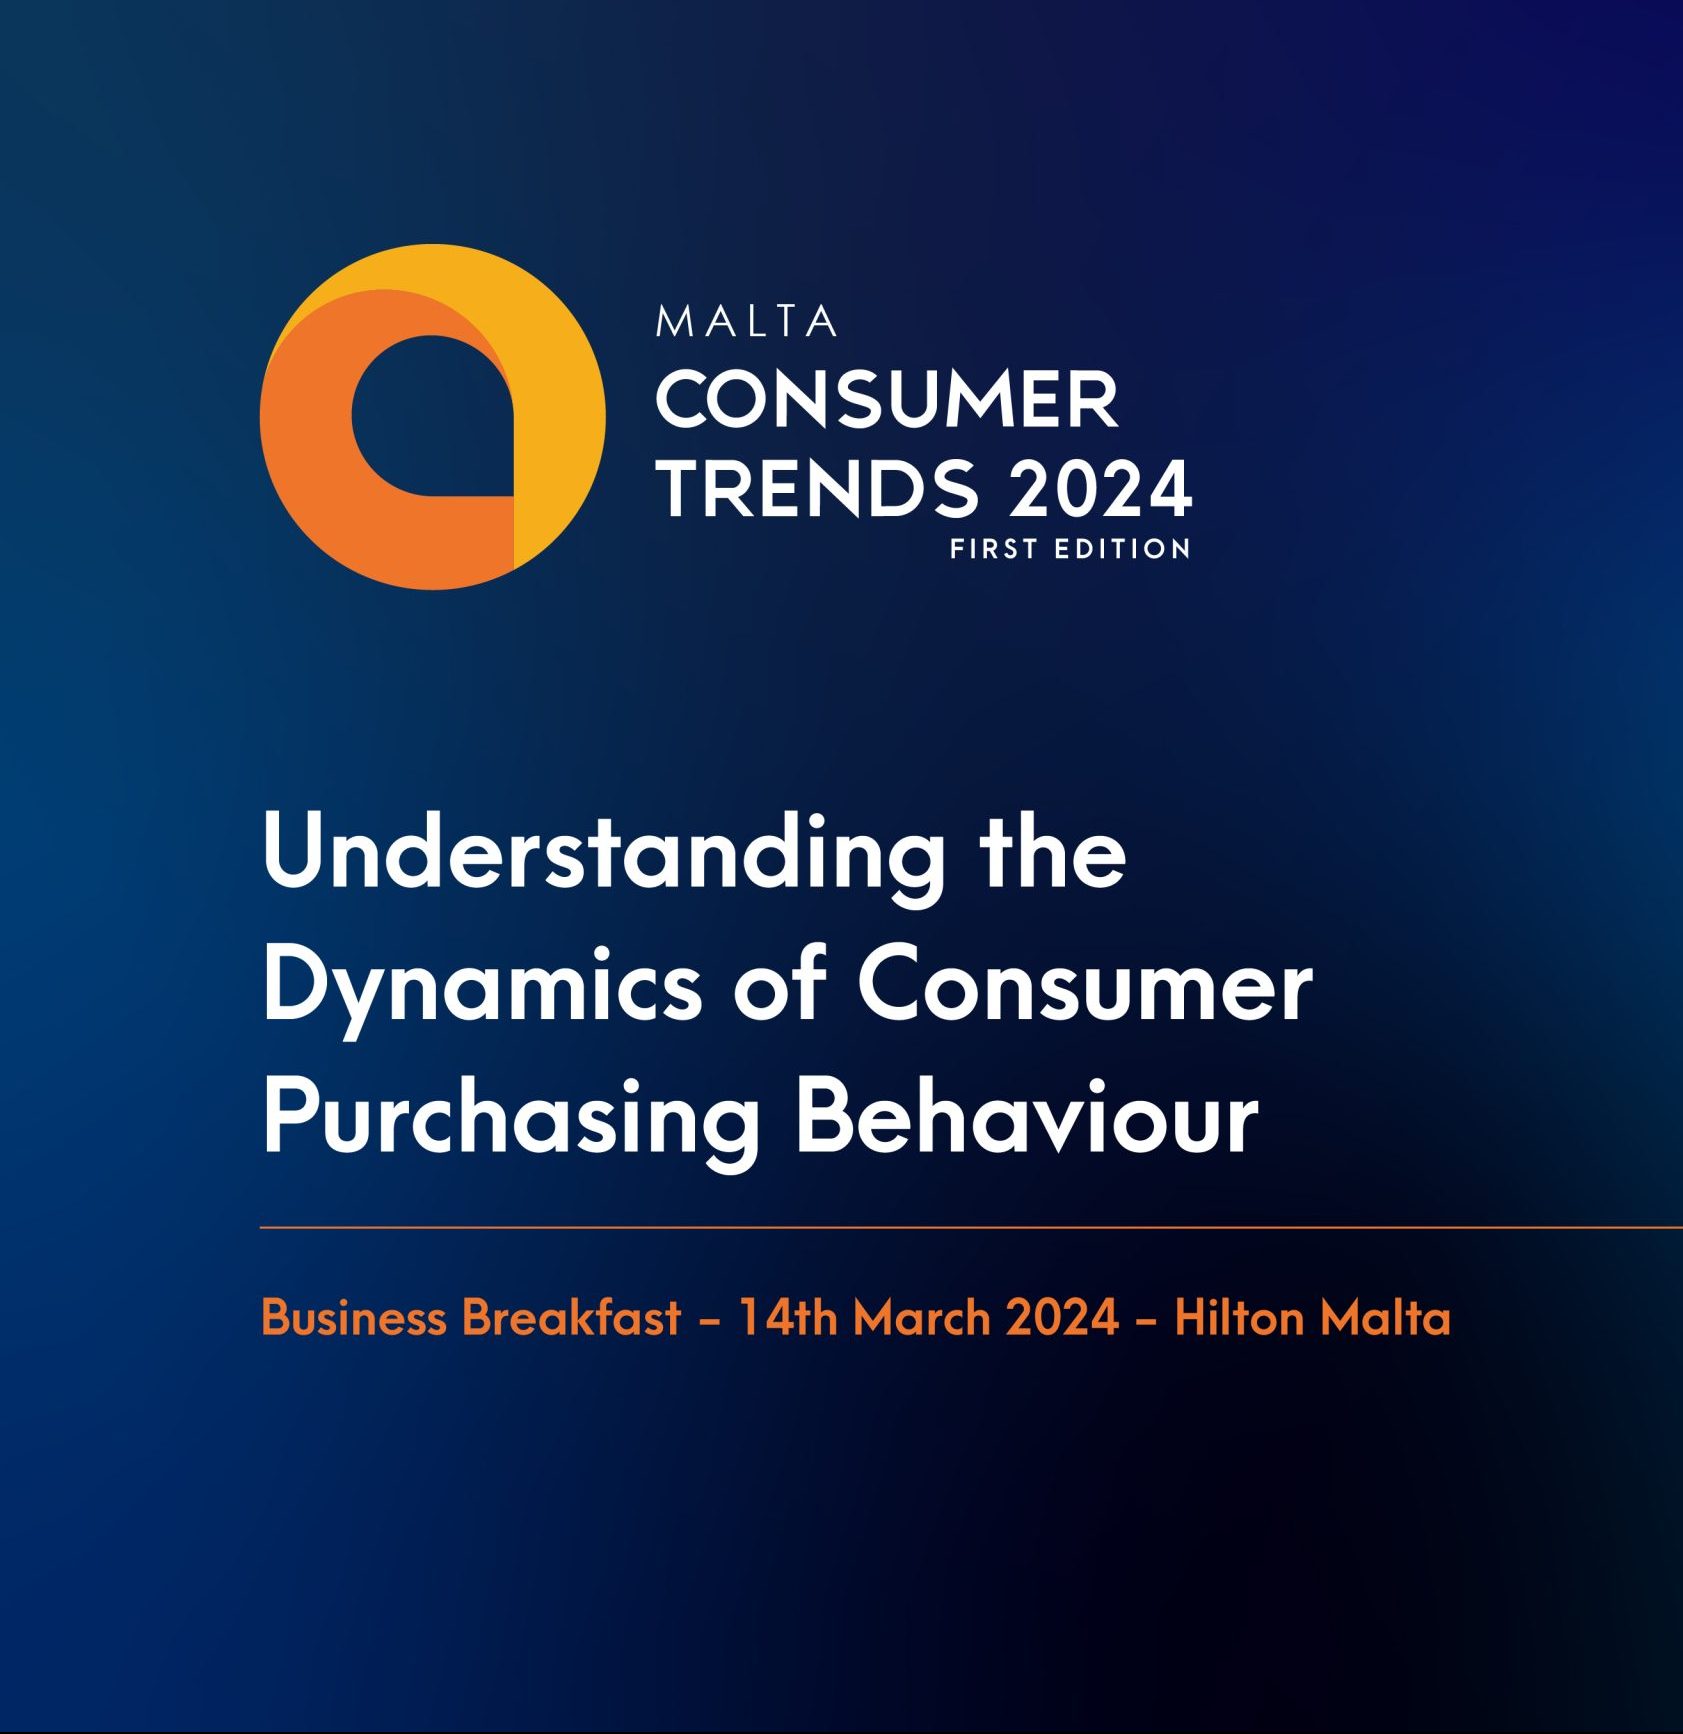 The first edition of the Malta Consumer Trends – Understanding the Dynamics of Consumer Purchasing Behaviour